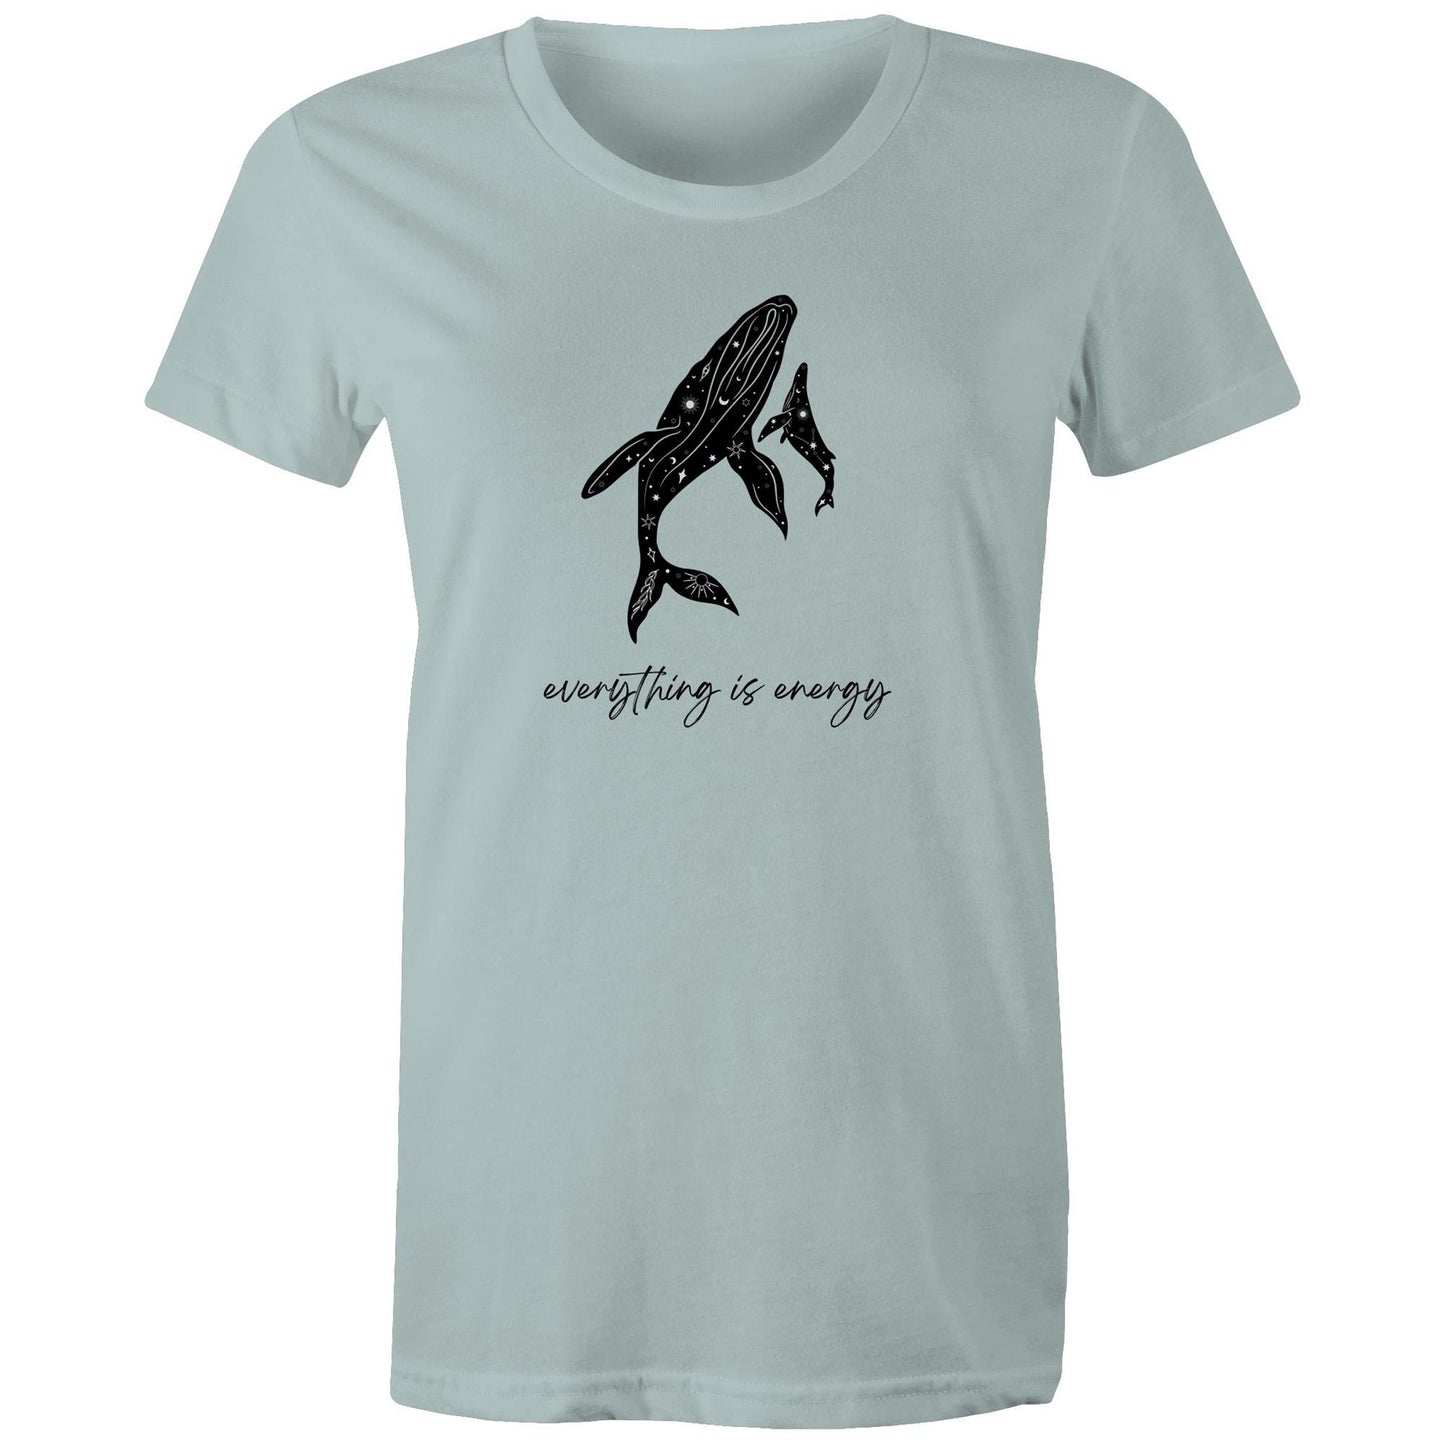 Current Mood 'EVERYTHING IS ENERGY' Women's Tee